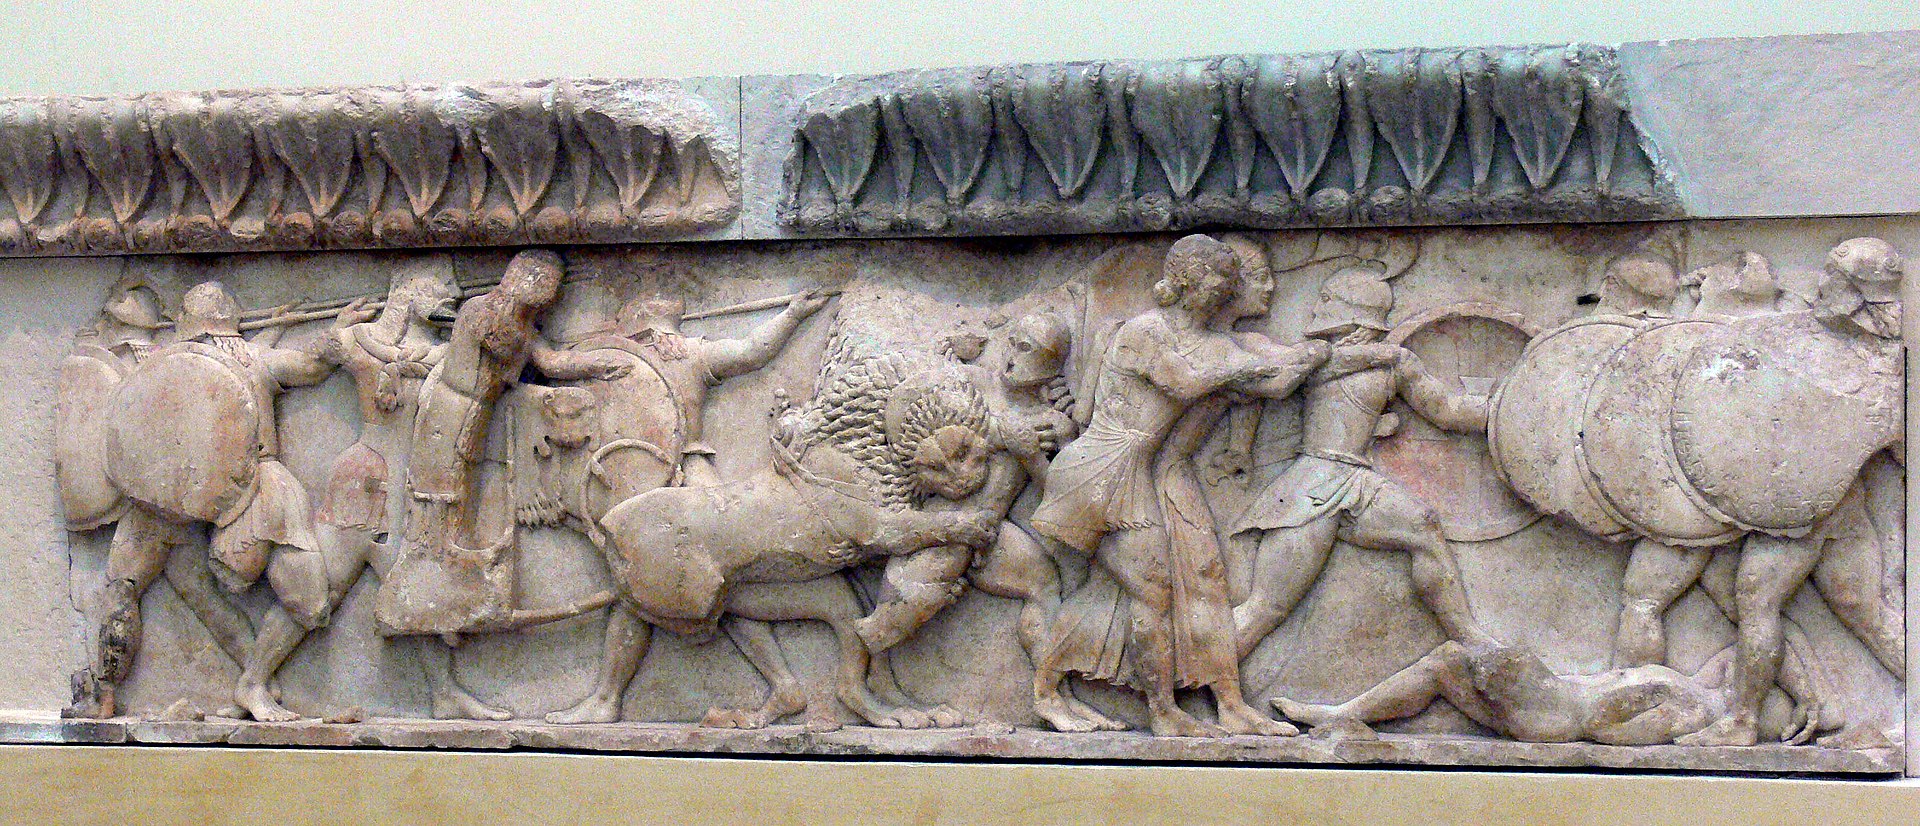 Gods and giants, armed with round shields and spears, fight. A large lion is in the melee.